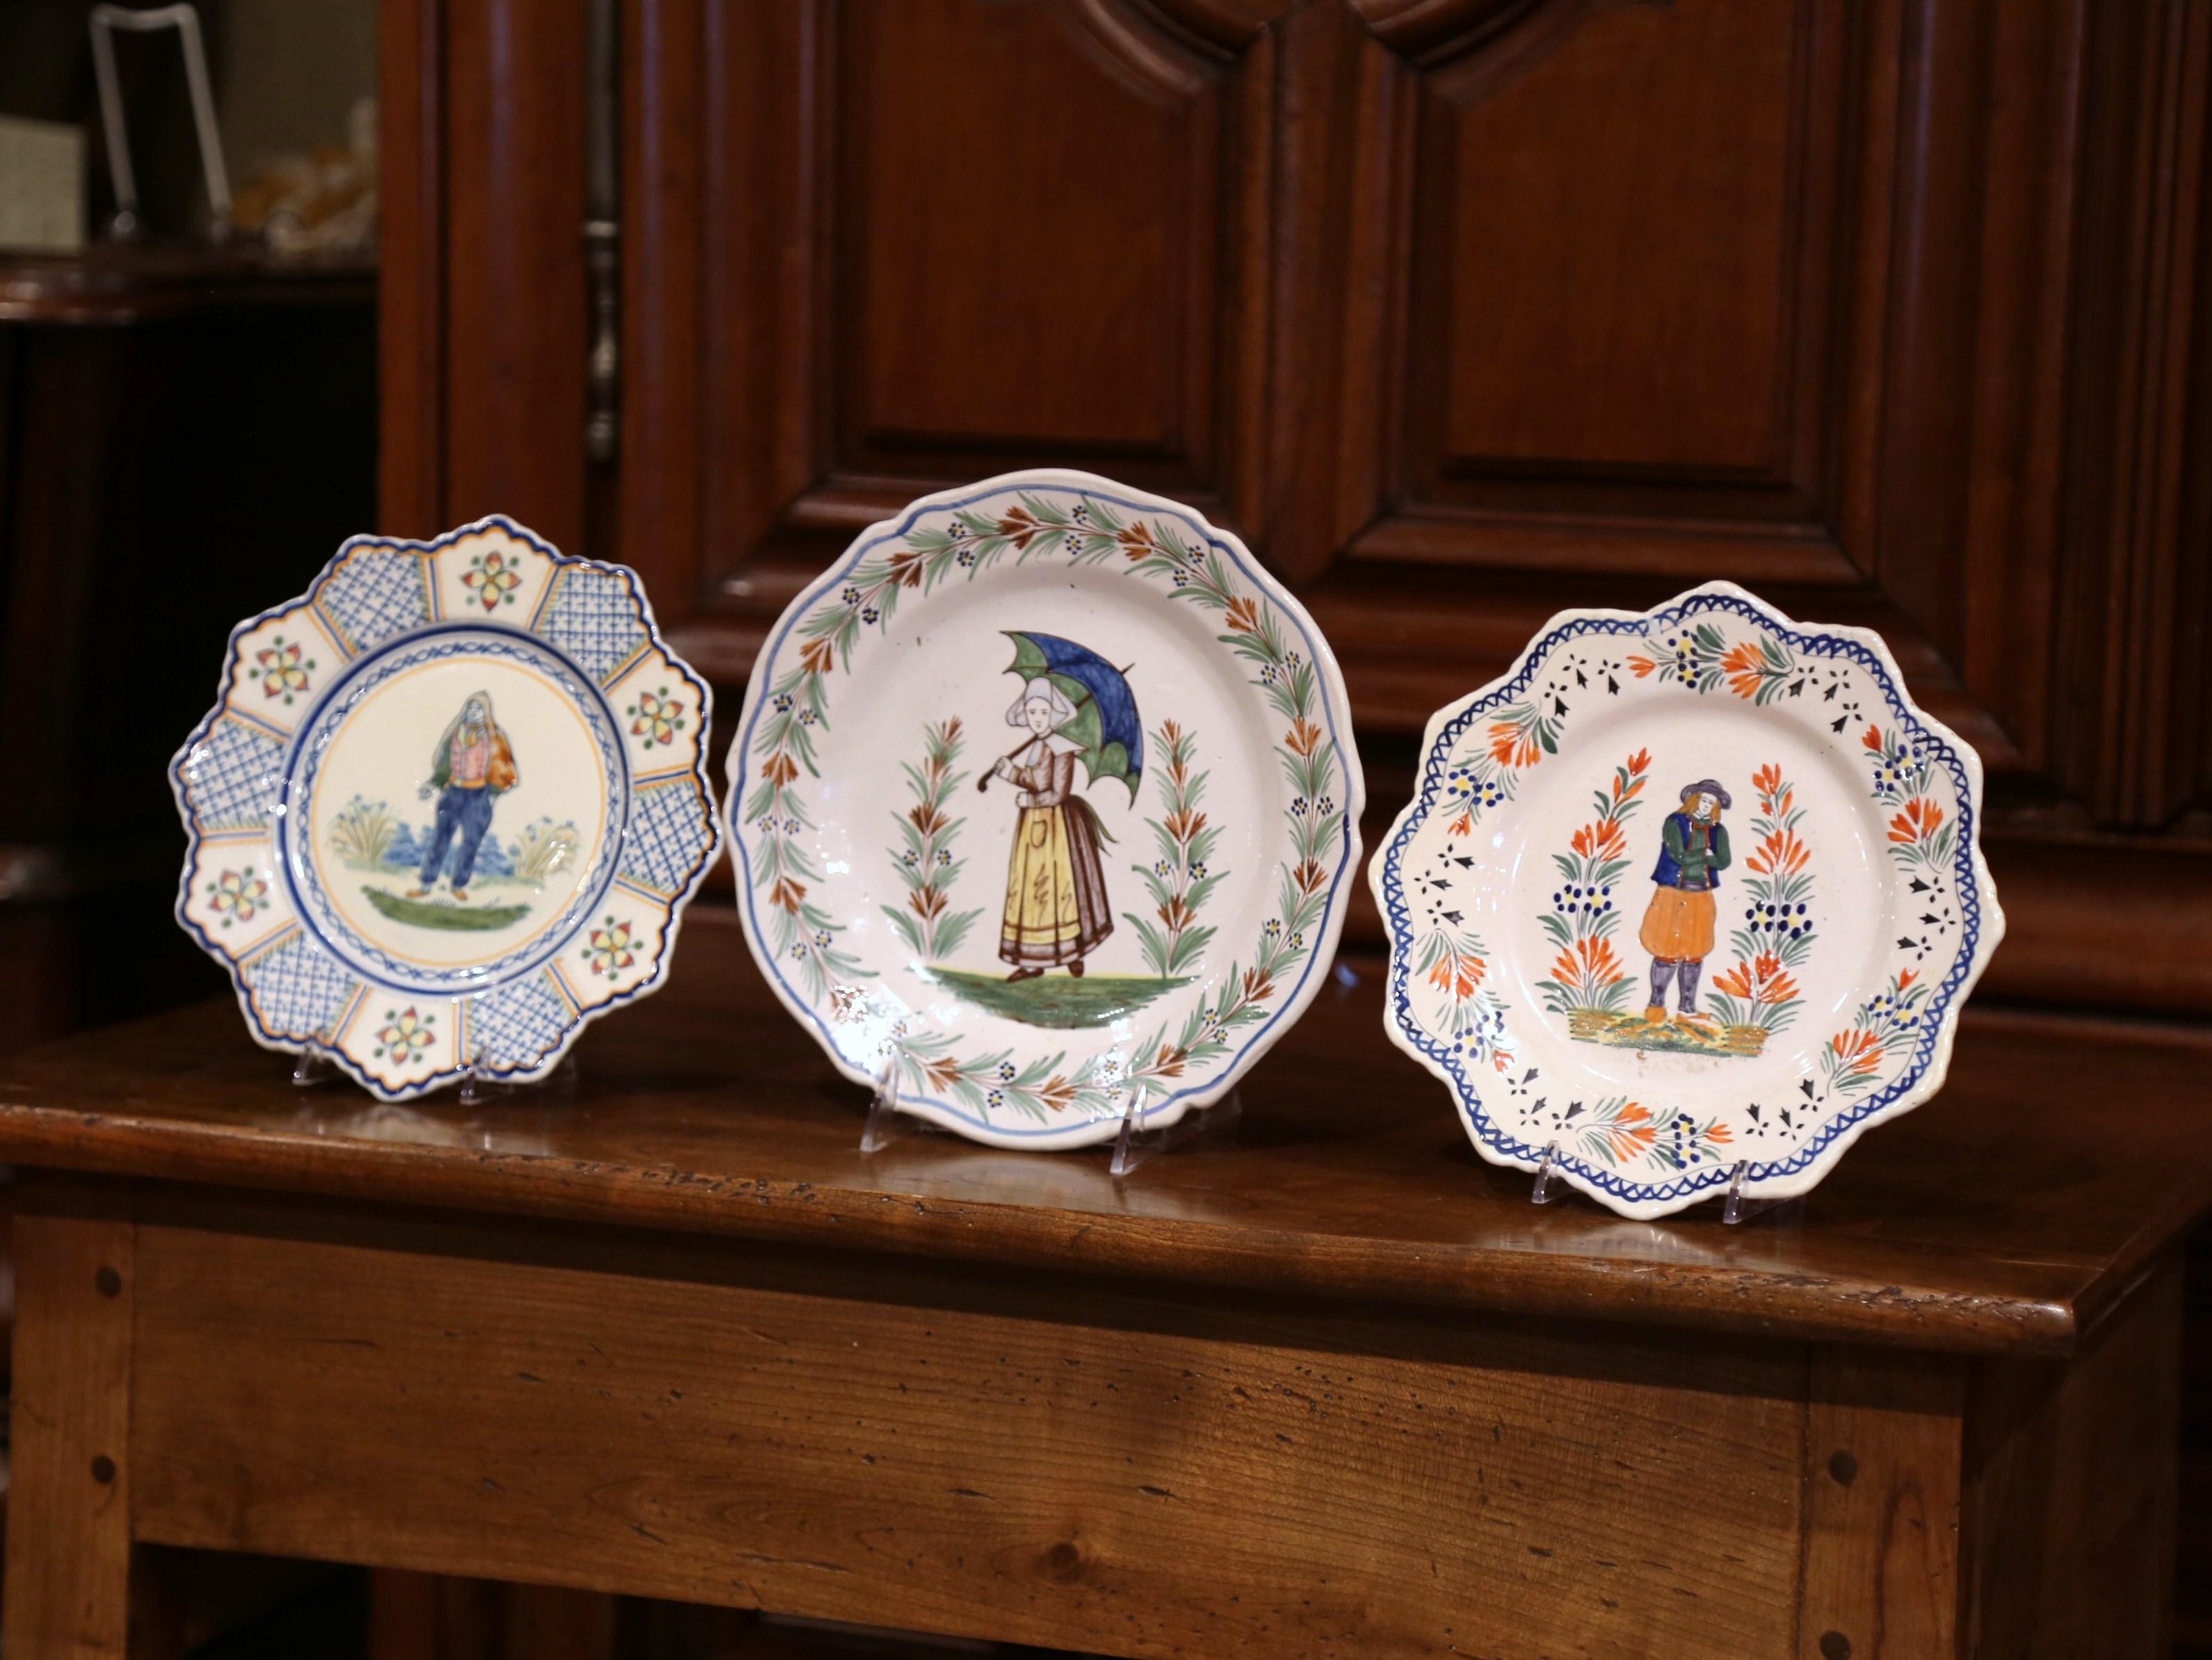 Decorate a cabinet or a shelf with this set of three ceramic plates from Brittany. Crafted in Quimper, circa 1930, each colorful plate is beautifully hand painted and features traditional Breton figures along with floral decor embellishment. The